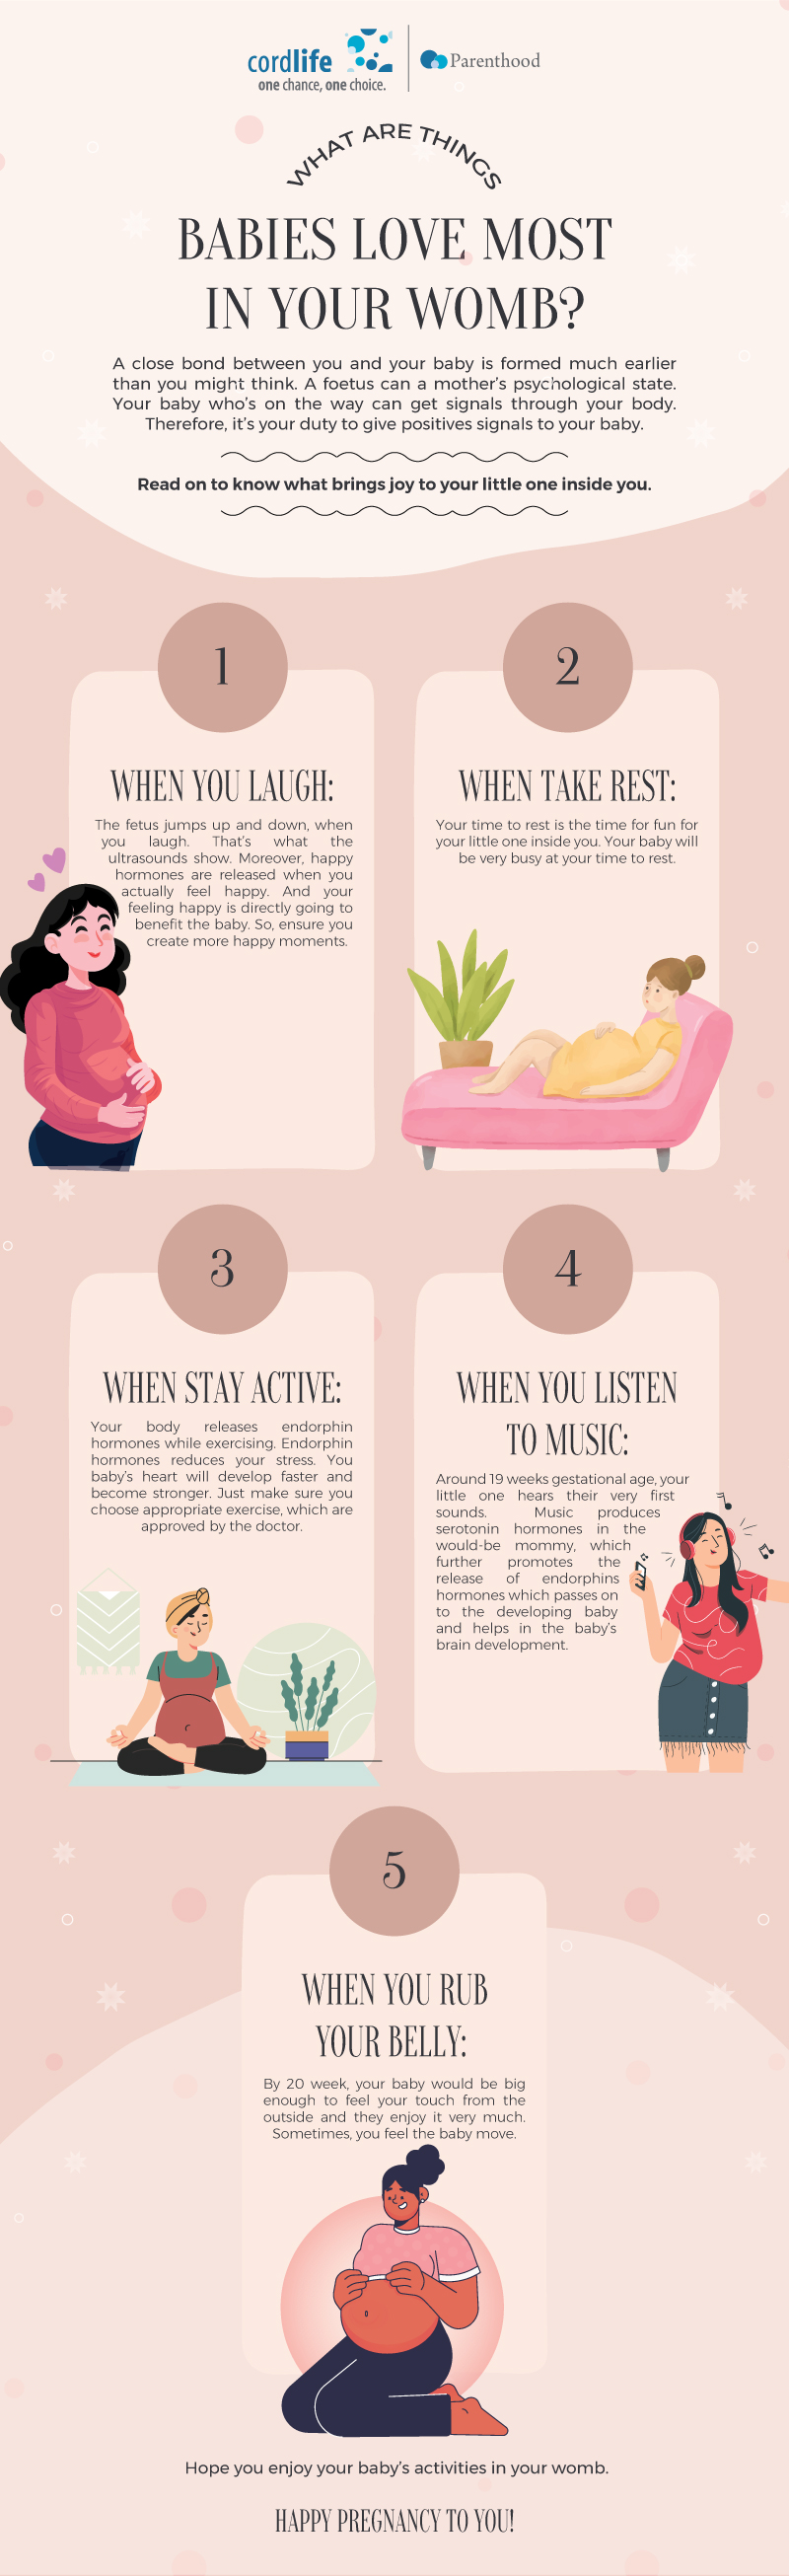 What are things Babies love most in your womb